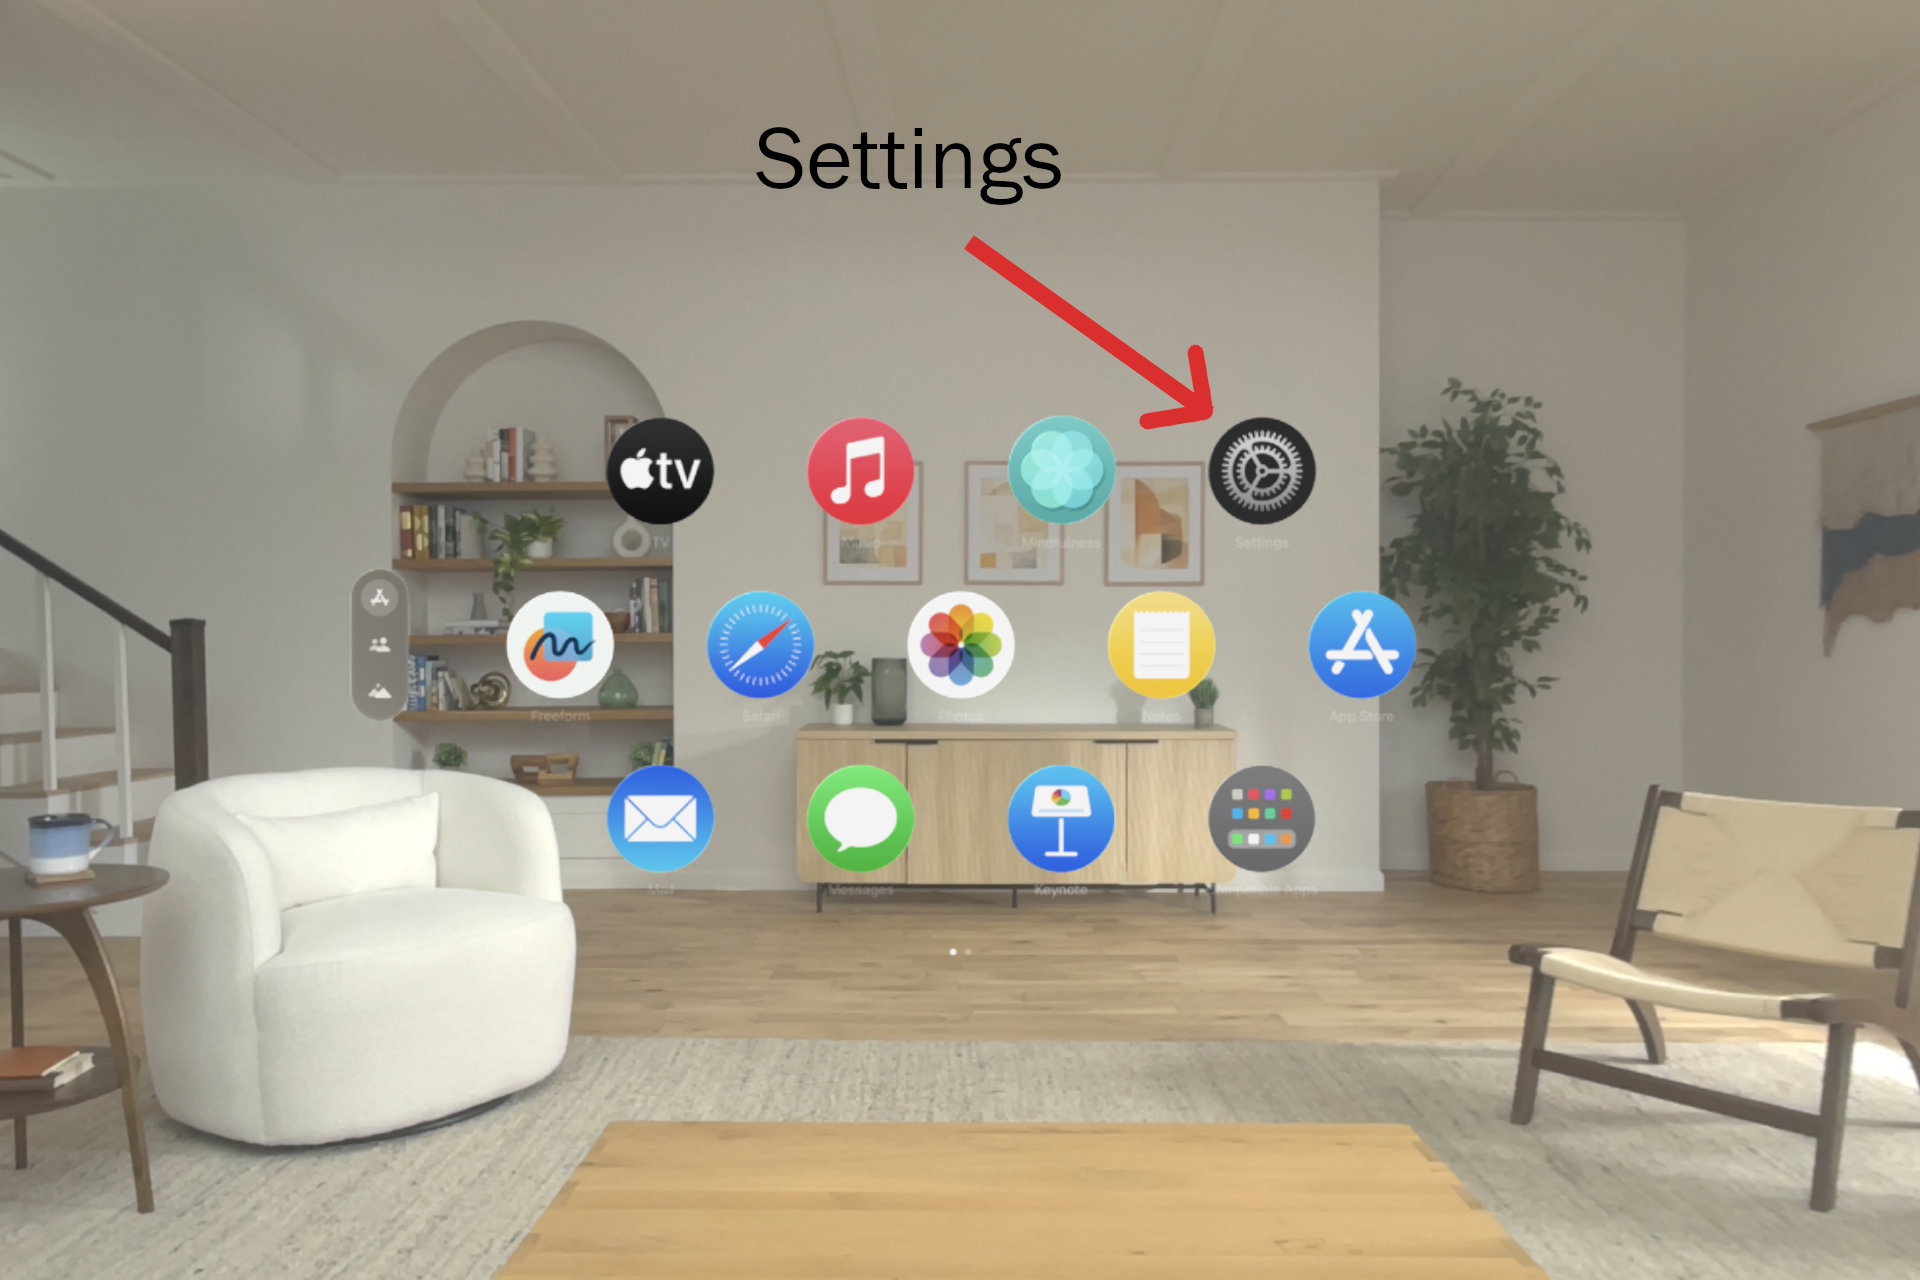 The Settings icon looks the same Apple Vision Pro as it does on your iPhone.